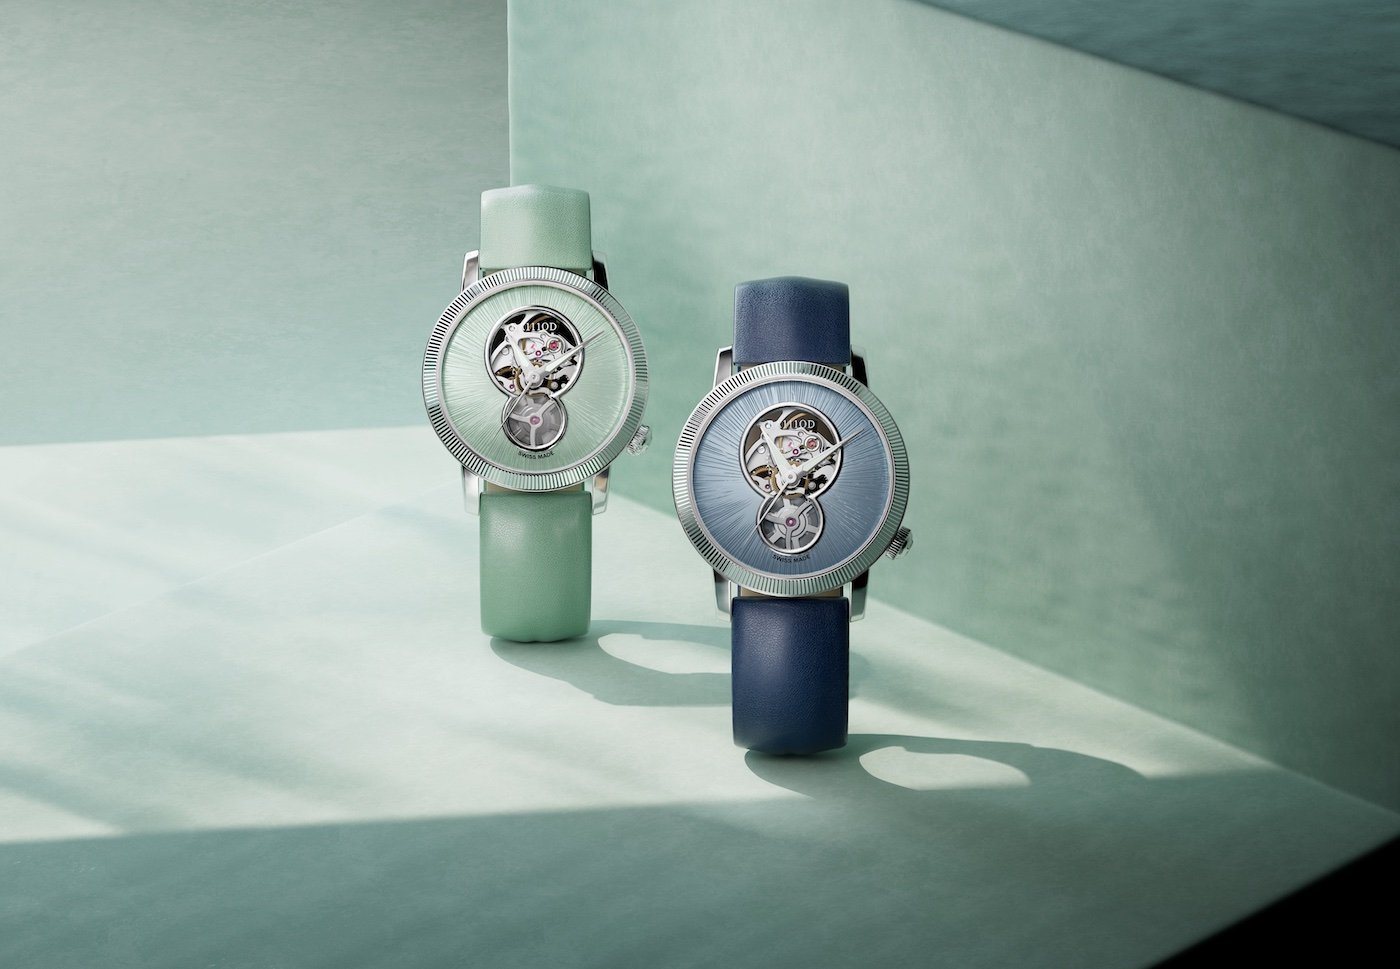 BA111OD introduces 36mm watches in five designs for women